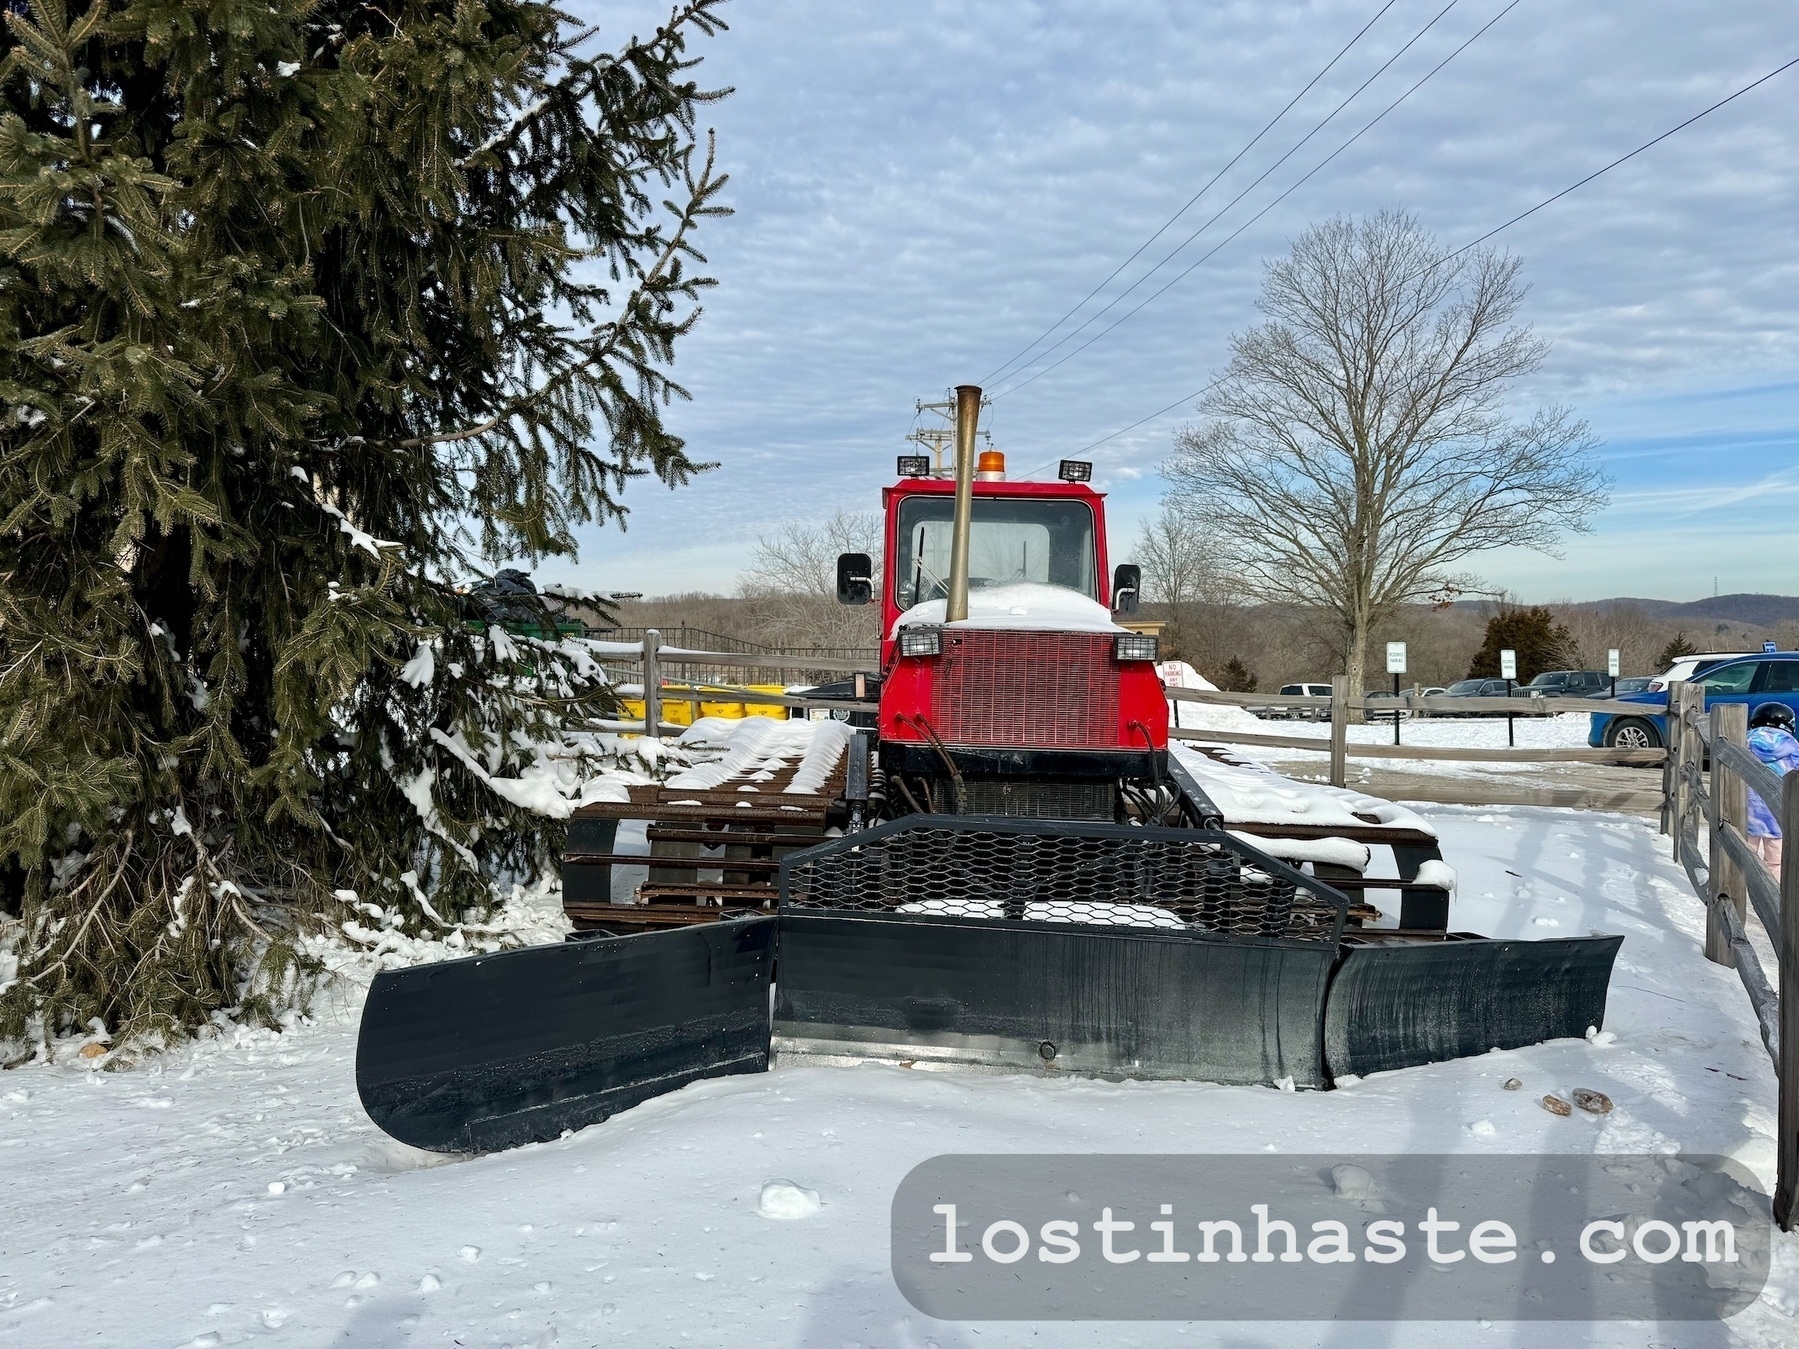 A red snow groomer with a front blade is parked on a snowy surface, near pine trees and a clear sky overhead.